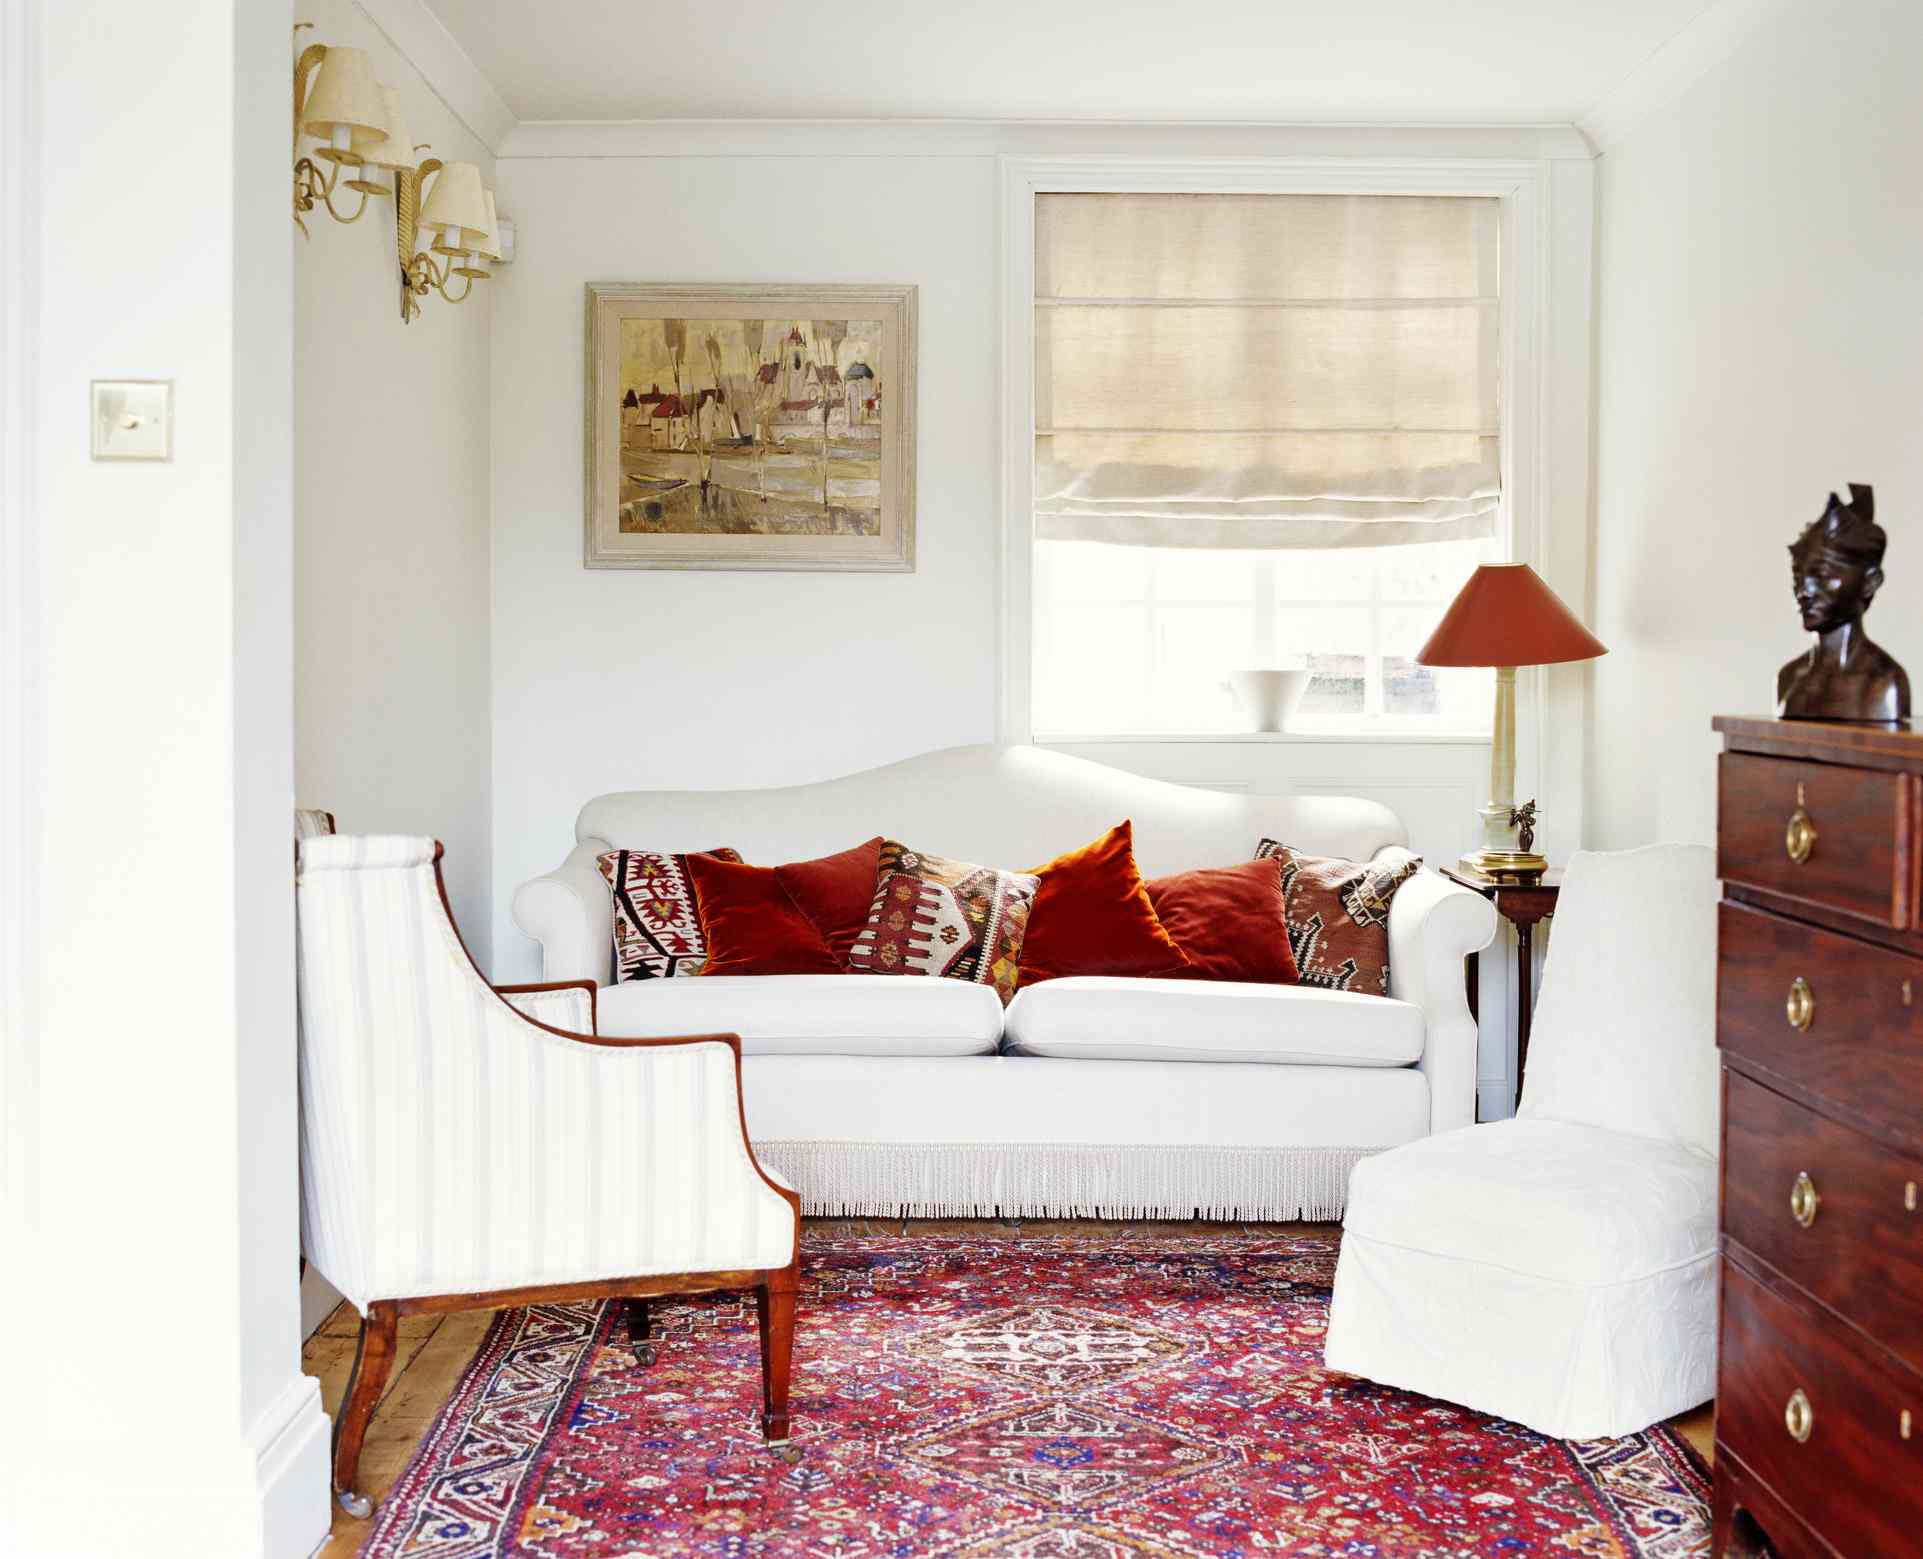 4 Consider how you want the living room to feel